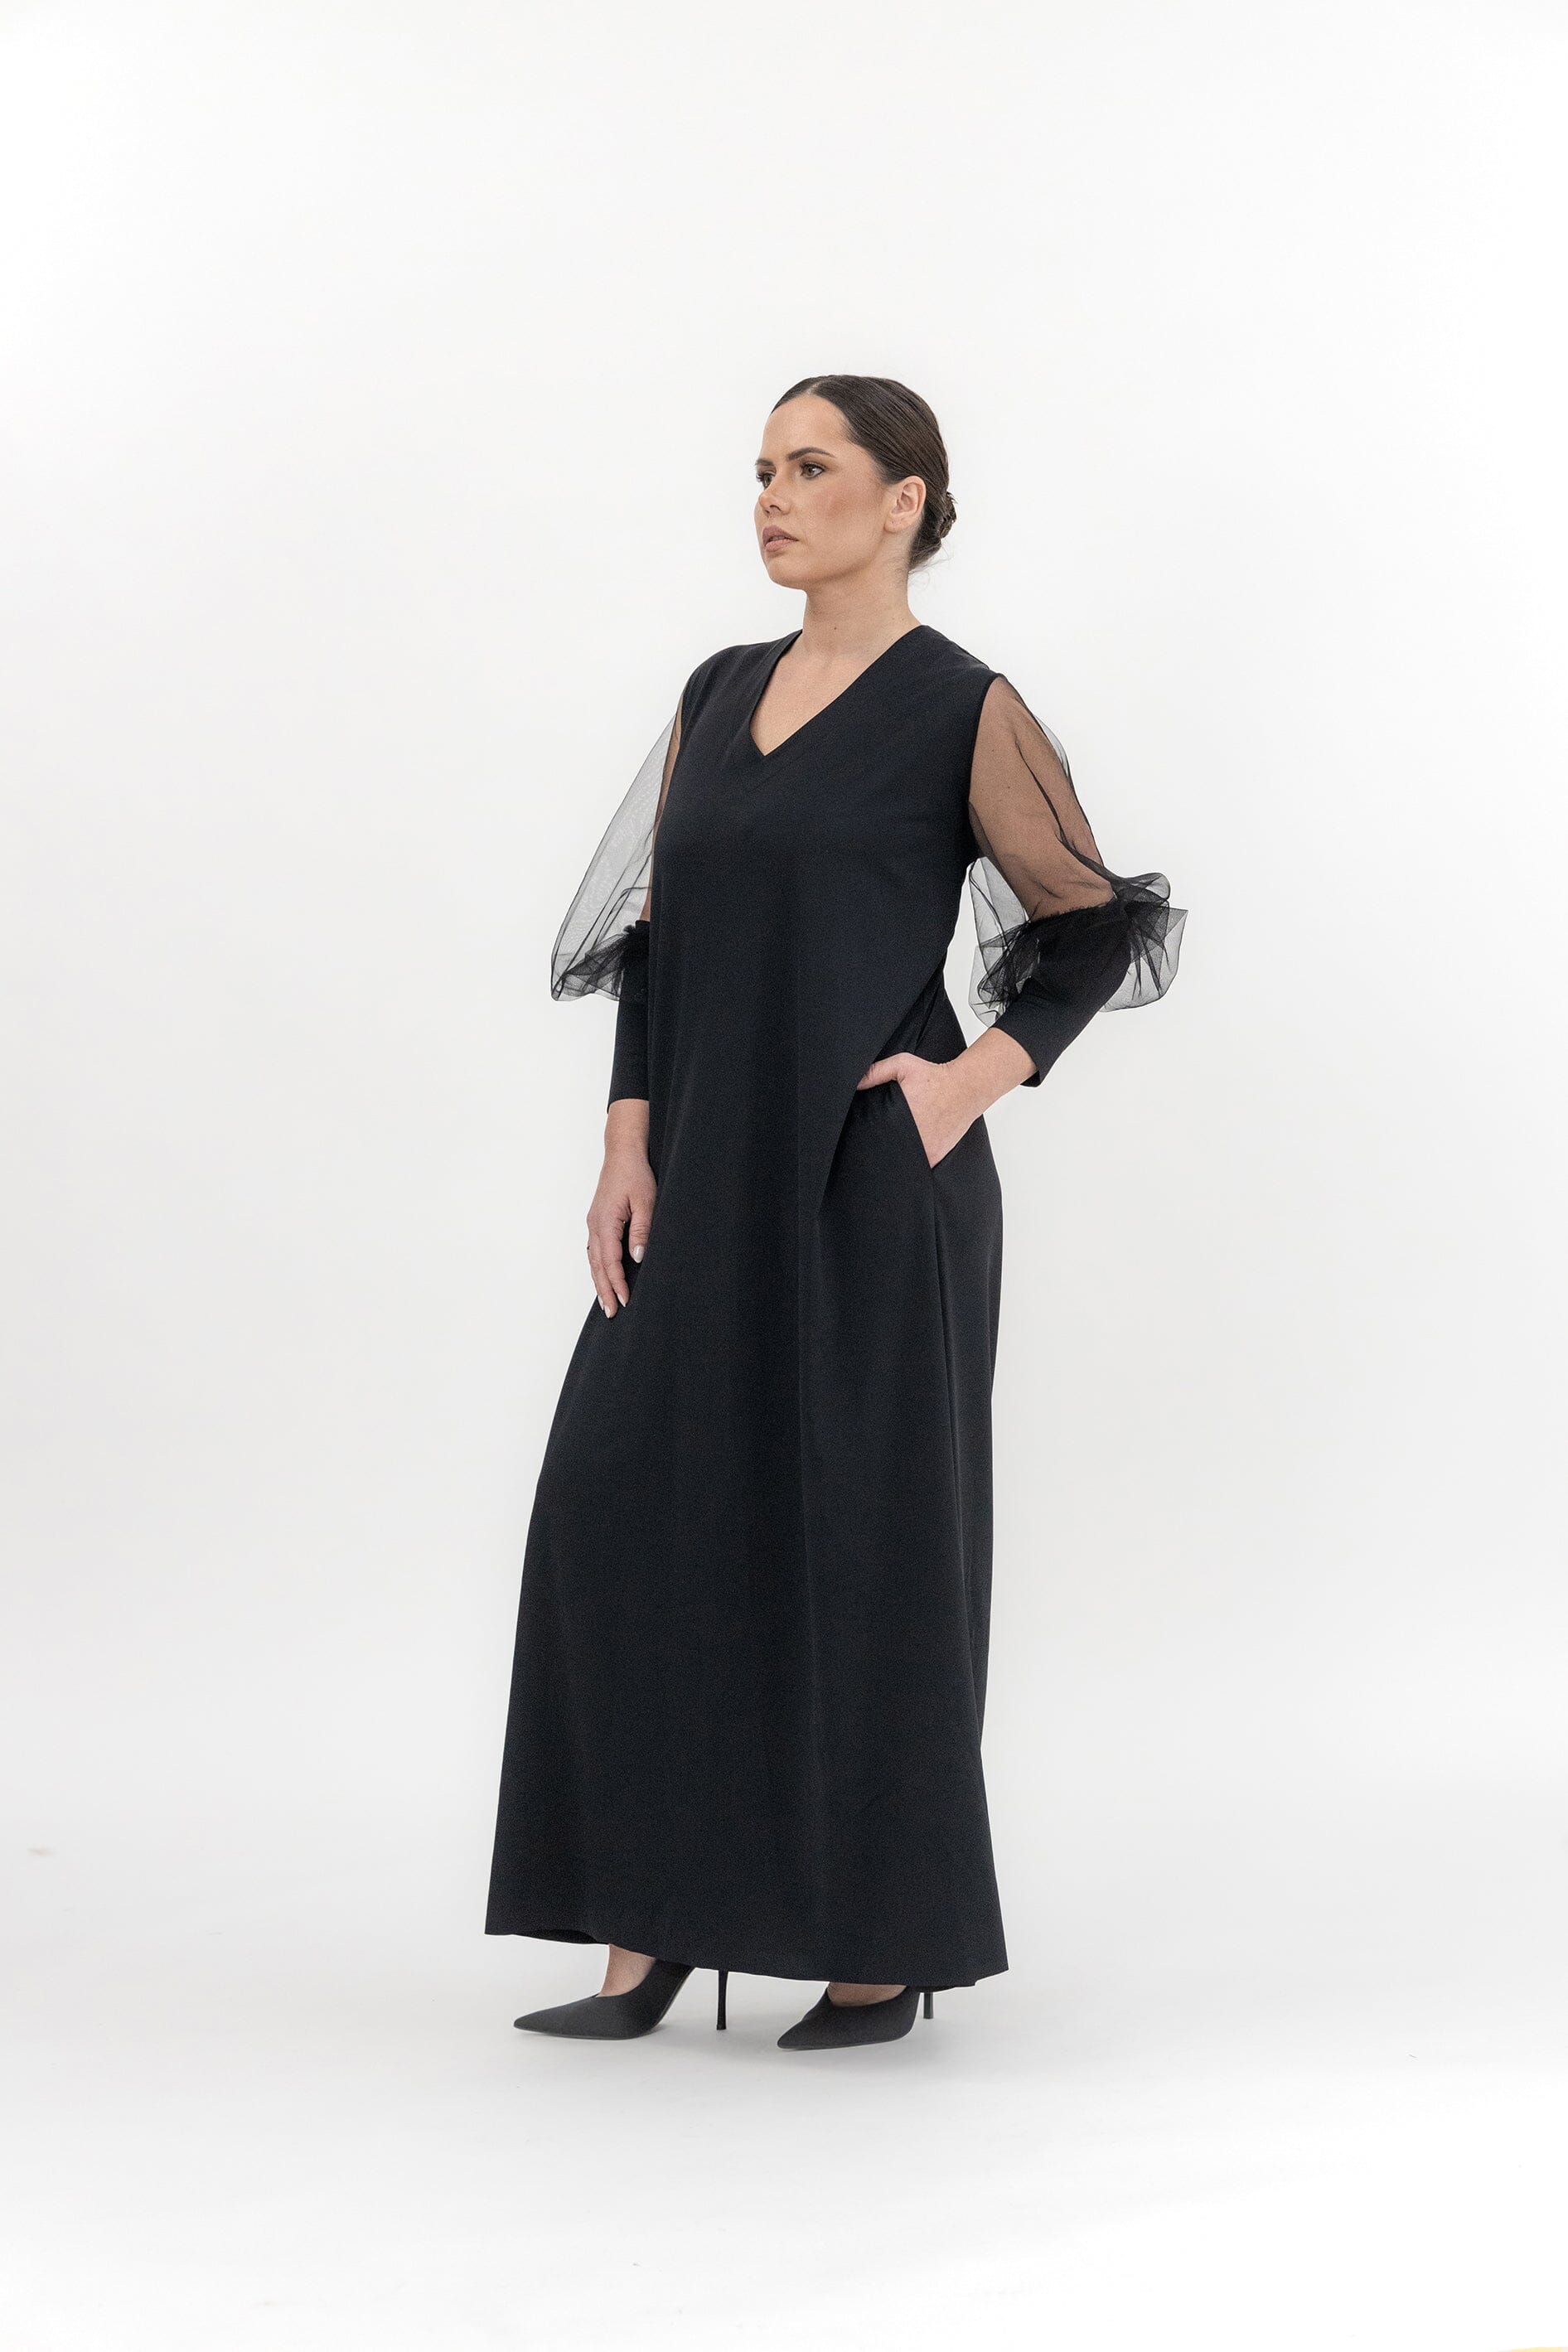  Seeing Through You Dress Black Product Amoralle